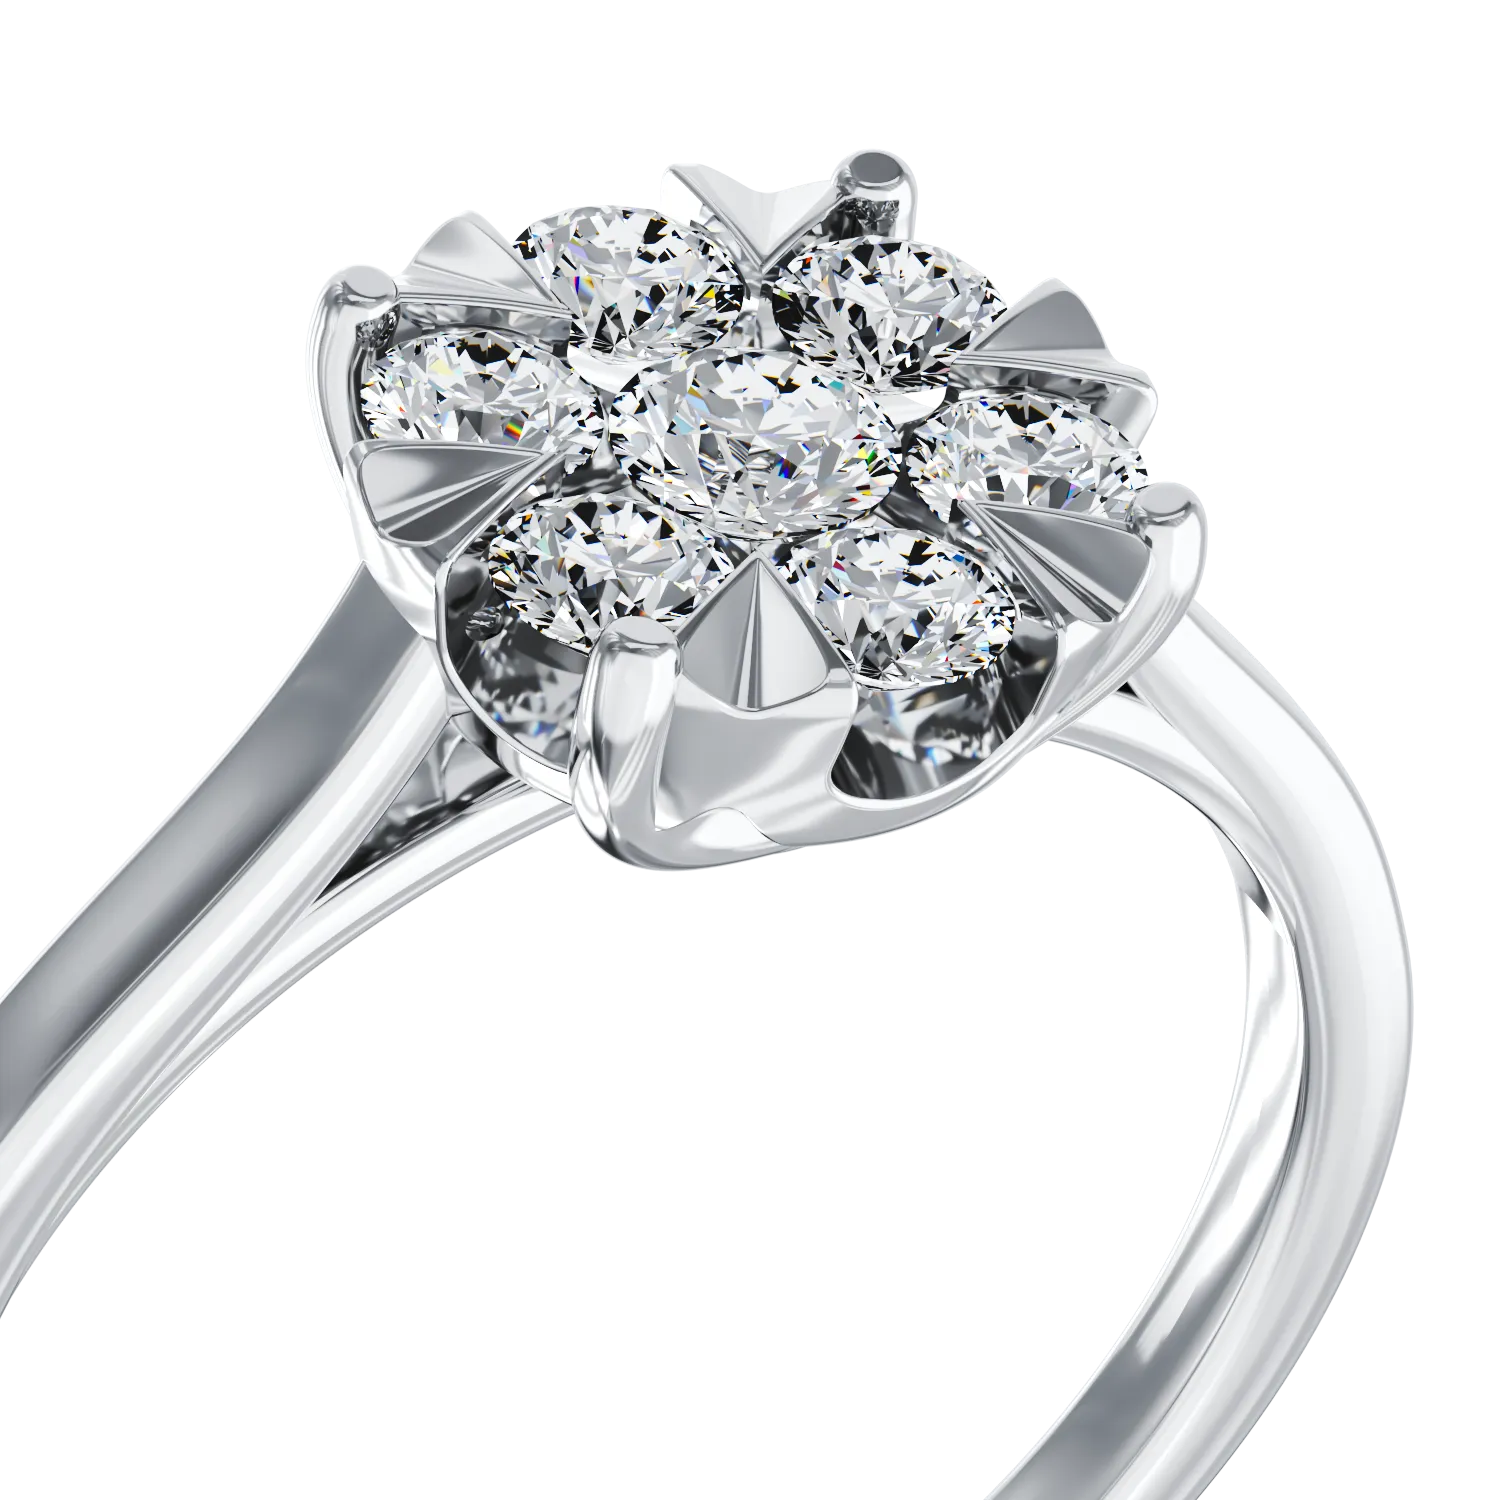 18K white gold engagement ring with 0.5ct diamonds